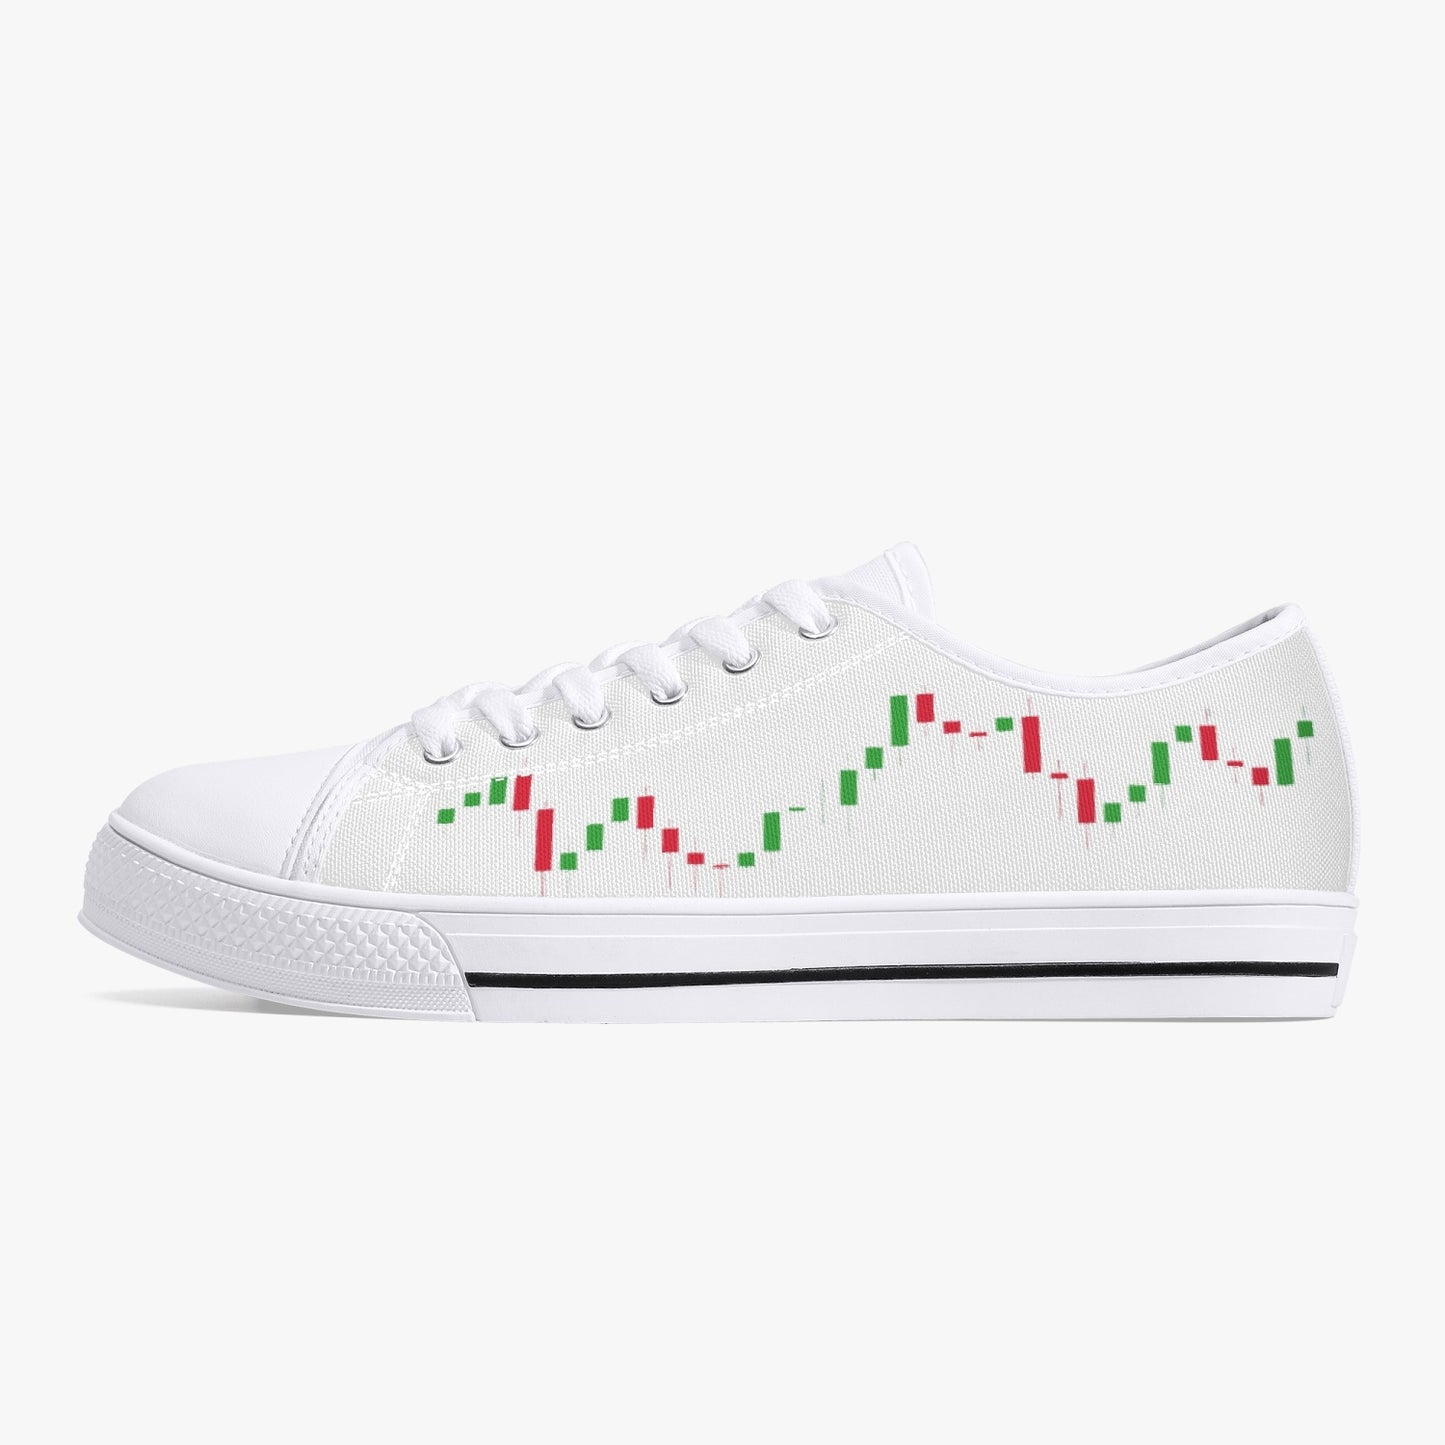 178. Classic Low-Top Canvas Shoes - White/Black-TraderShop82